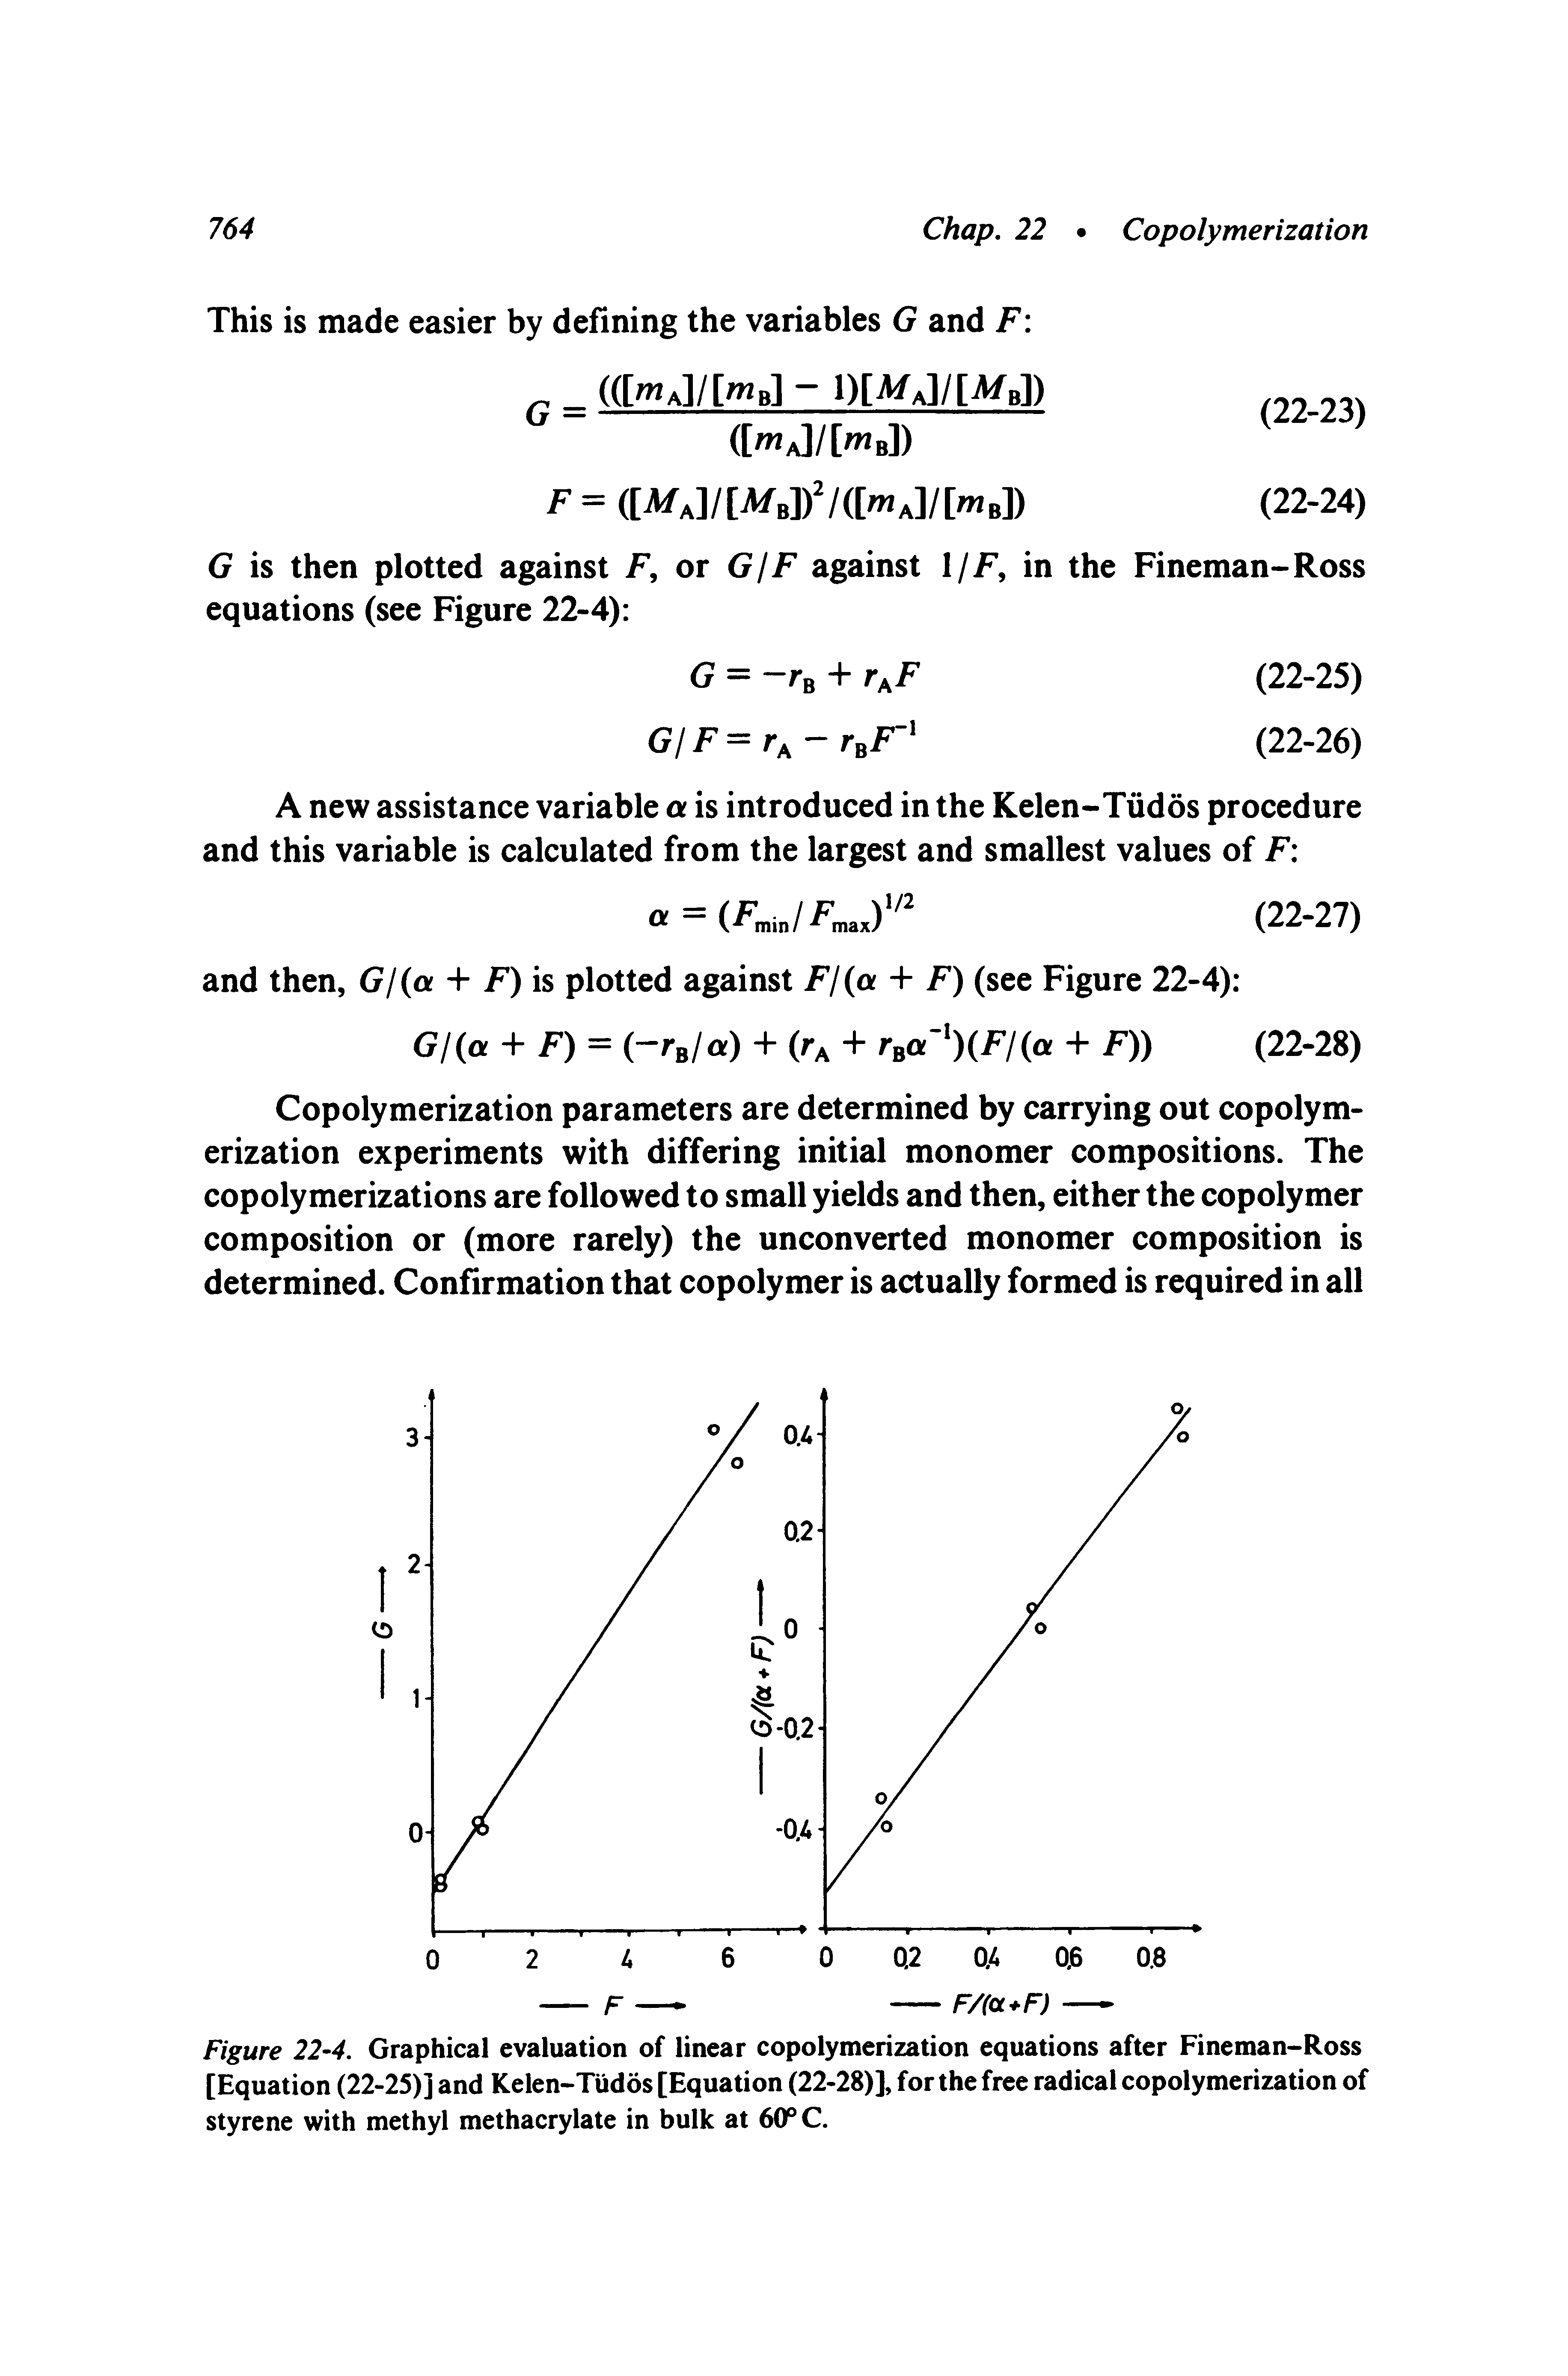 Figure 22-4. Graphical evaluation of linear copolymerization equations after Fineman-Ross [Equation (22-25)] and Kelen-Tiidos [Equation (22-28)], for the free radical copolymerization of styrene with methyl methacrylate in bulk at 6(f C.